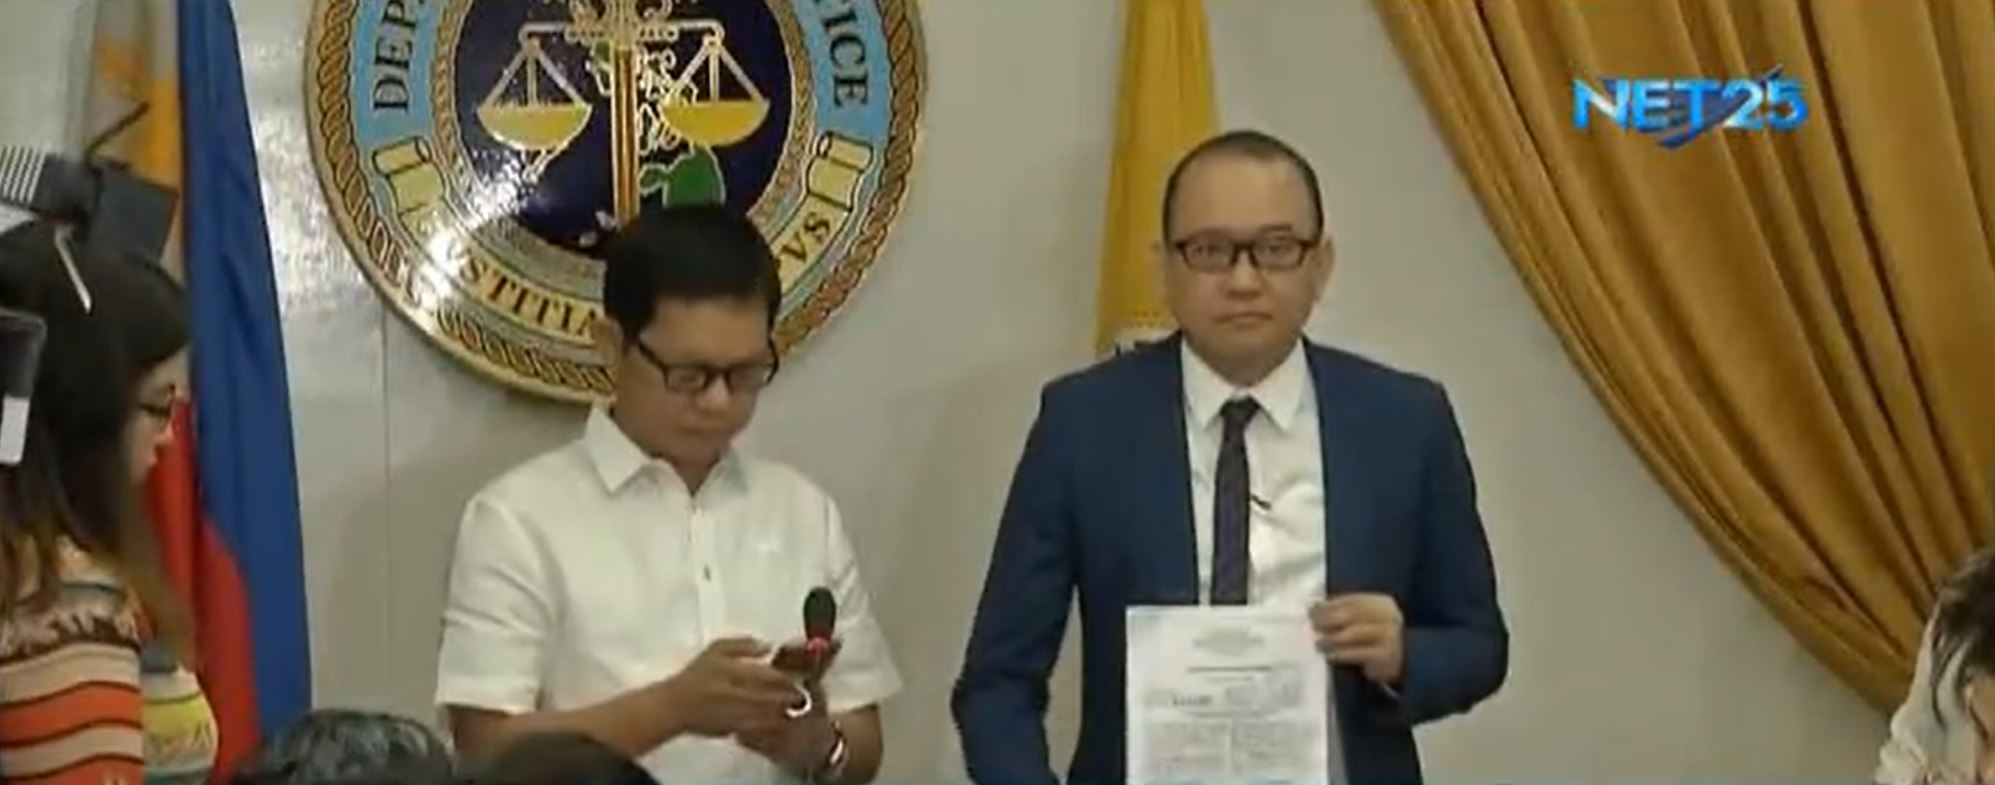 File photo of Bureau of Immigration deputy commissioners Al Argosino and Michael Robles when they presented the P30 million that was left of the P50 million given to them allegedly as "bribe" by an associate of Chinese gambling tycoon Jack Lam.  They are now in hot water after the retired police official, Wally Sombero, who allegedly gave the money to them filed a graft complaint against the two before the Office of the Ombudsman for allegedly extorting money from Lam.  (Eagle News Service)